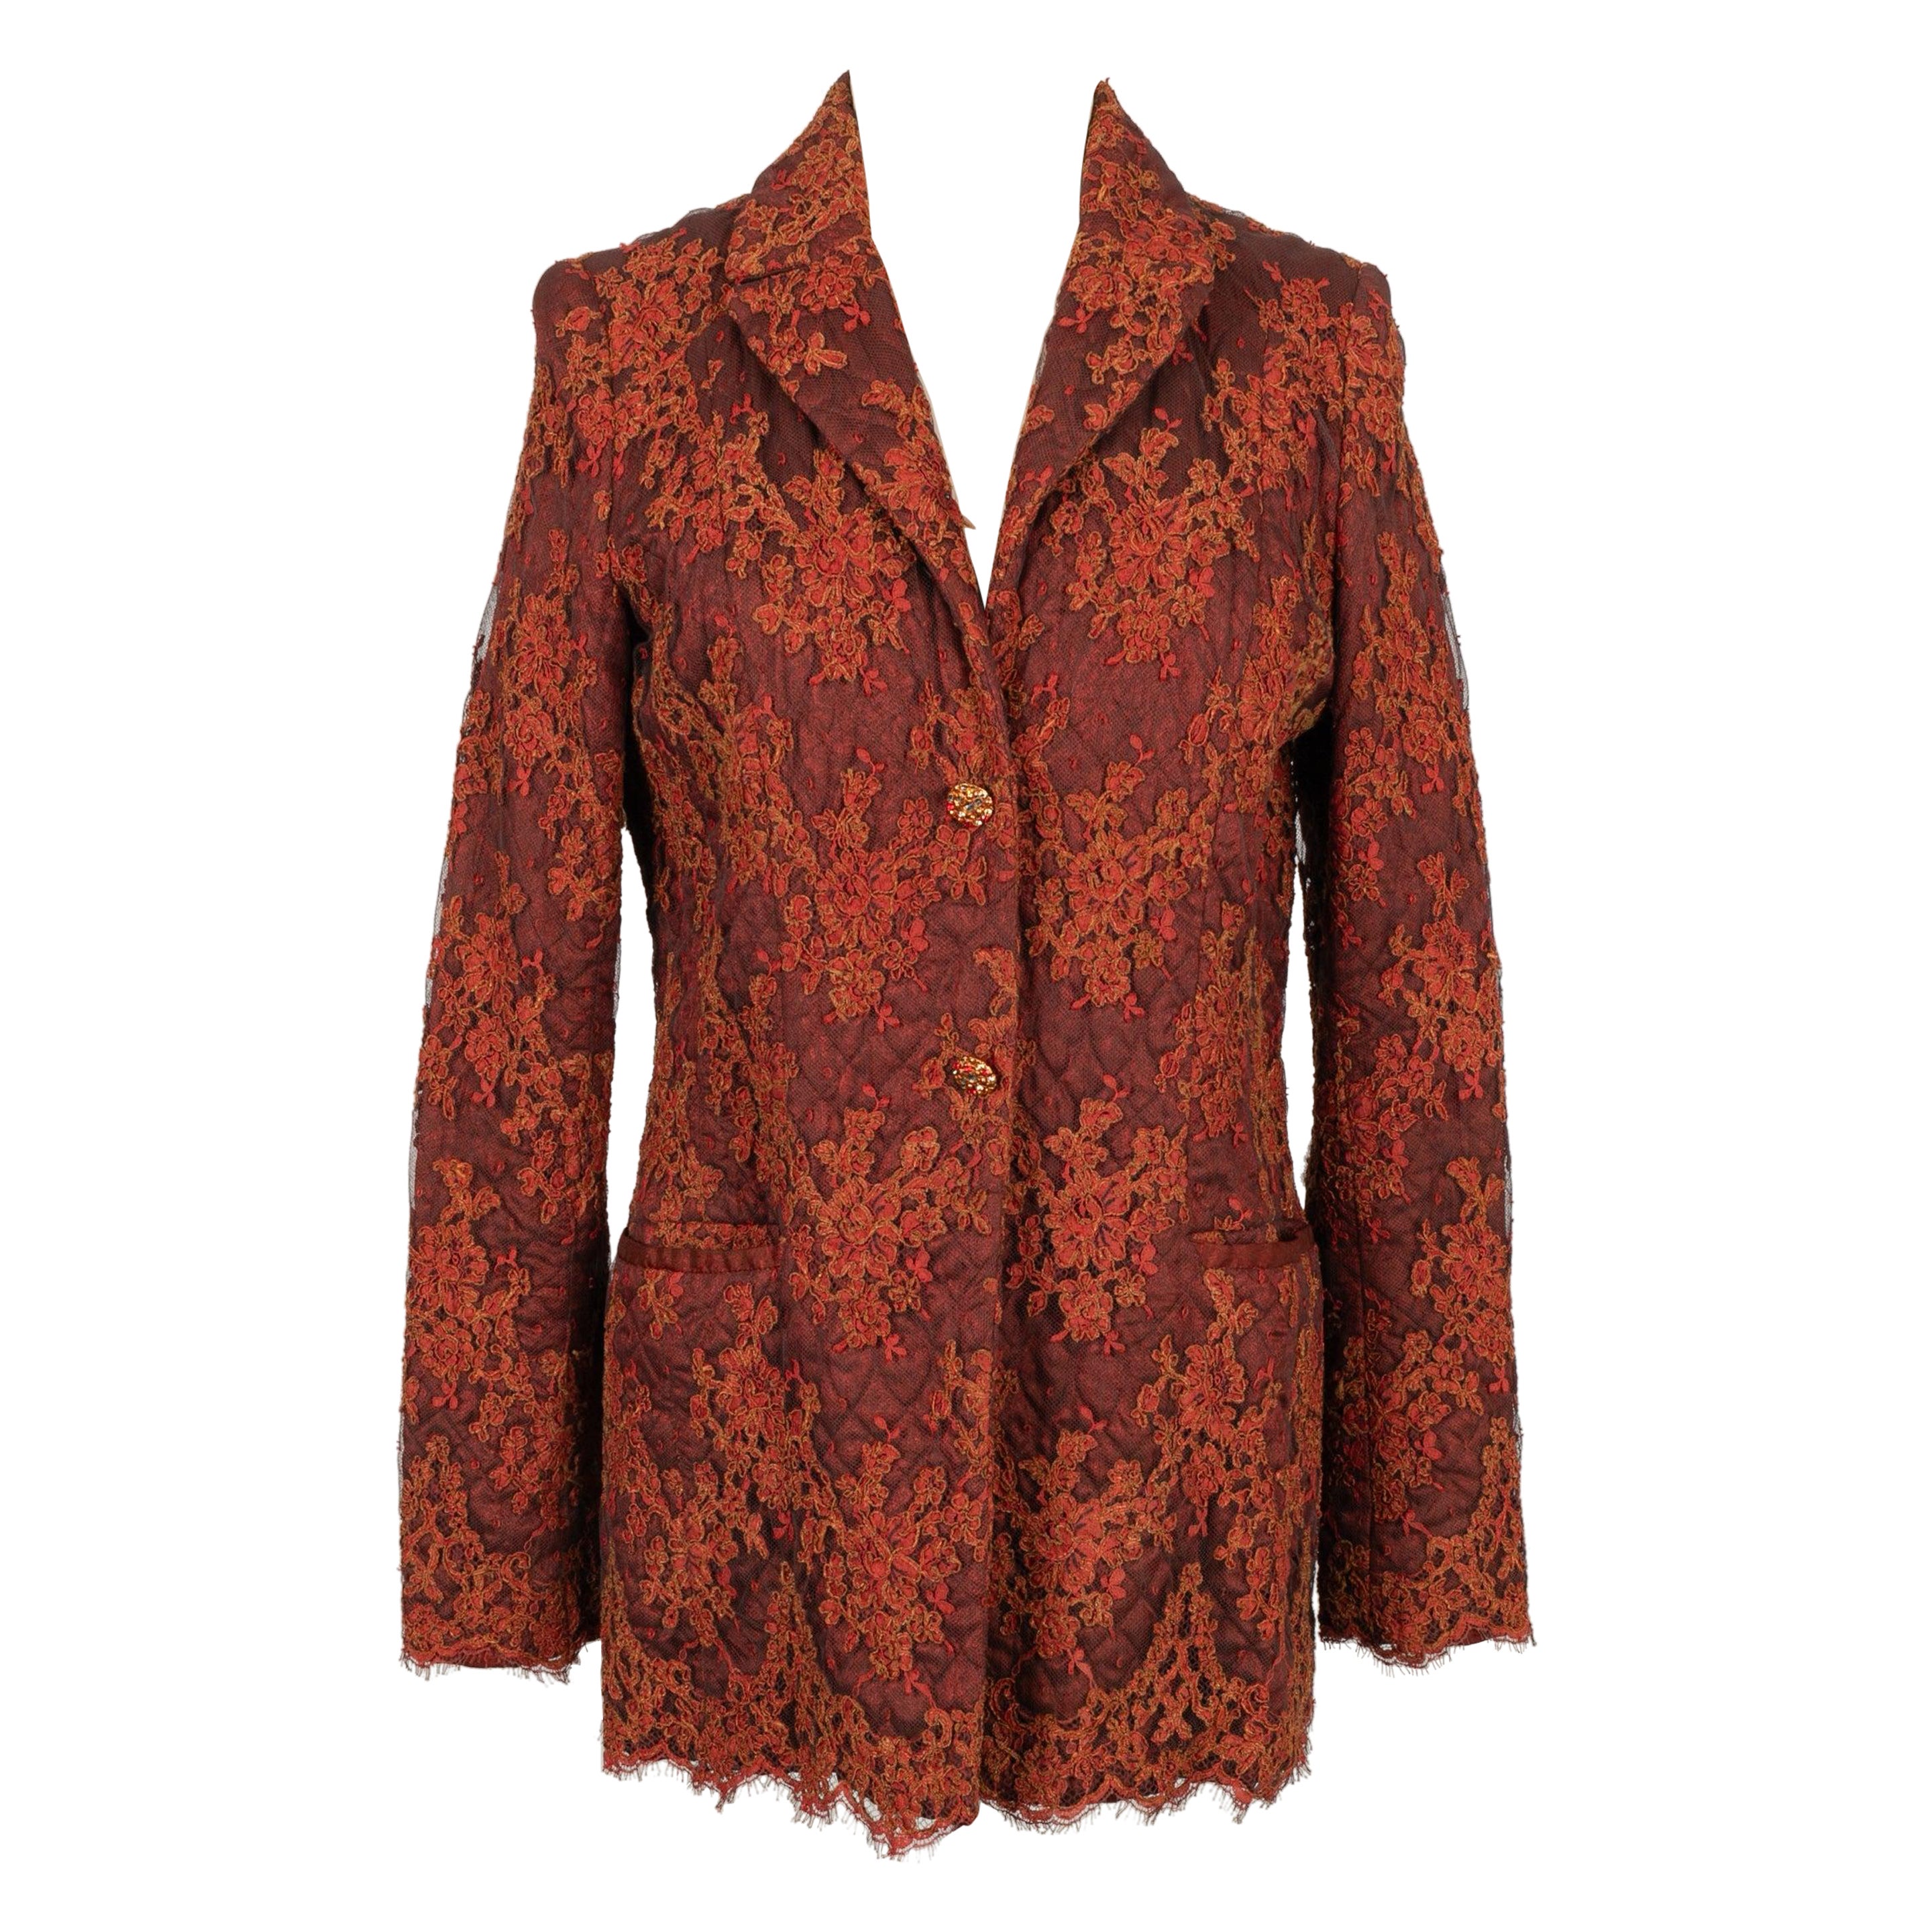 Christian Lacroix Lace and Fabric Jacket in Red/Rust Tones For Sale